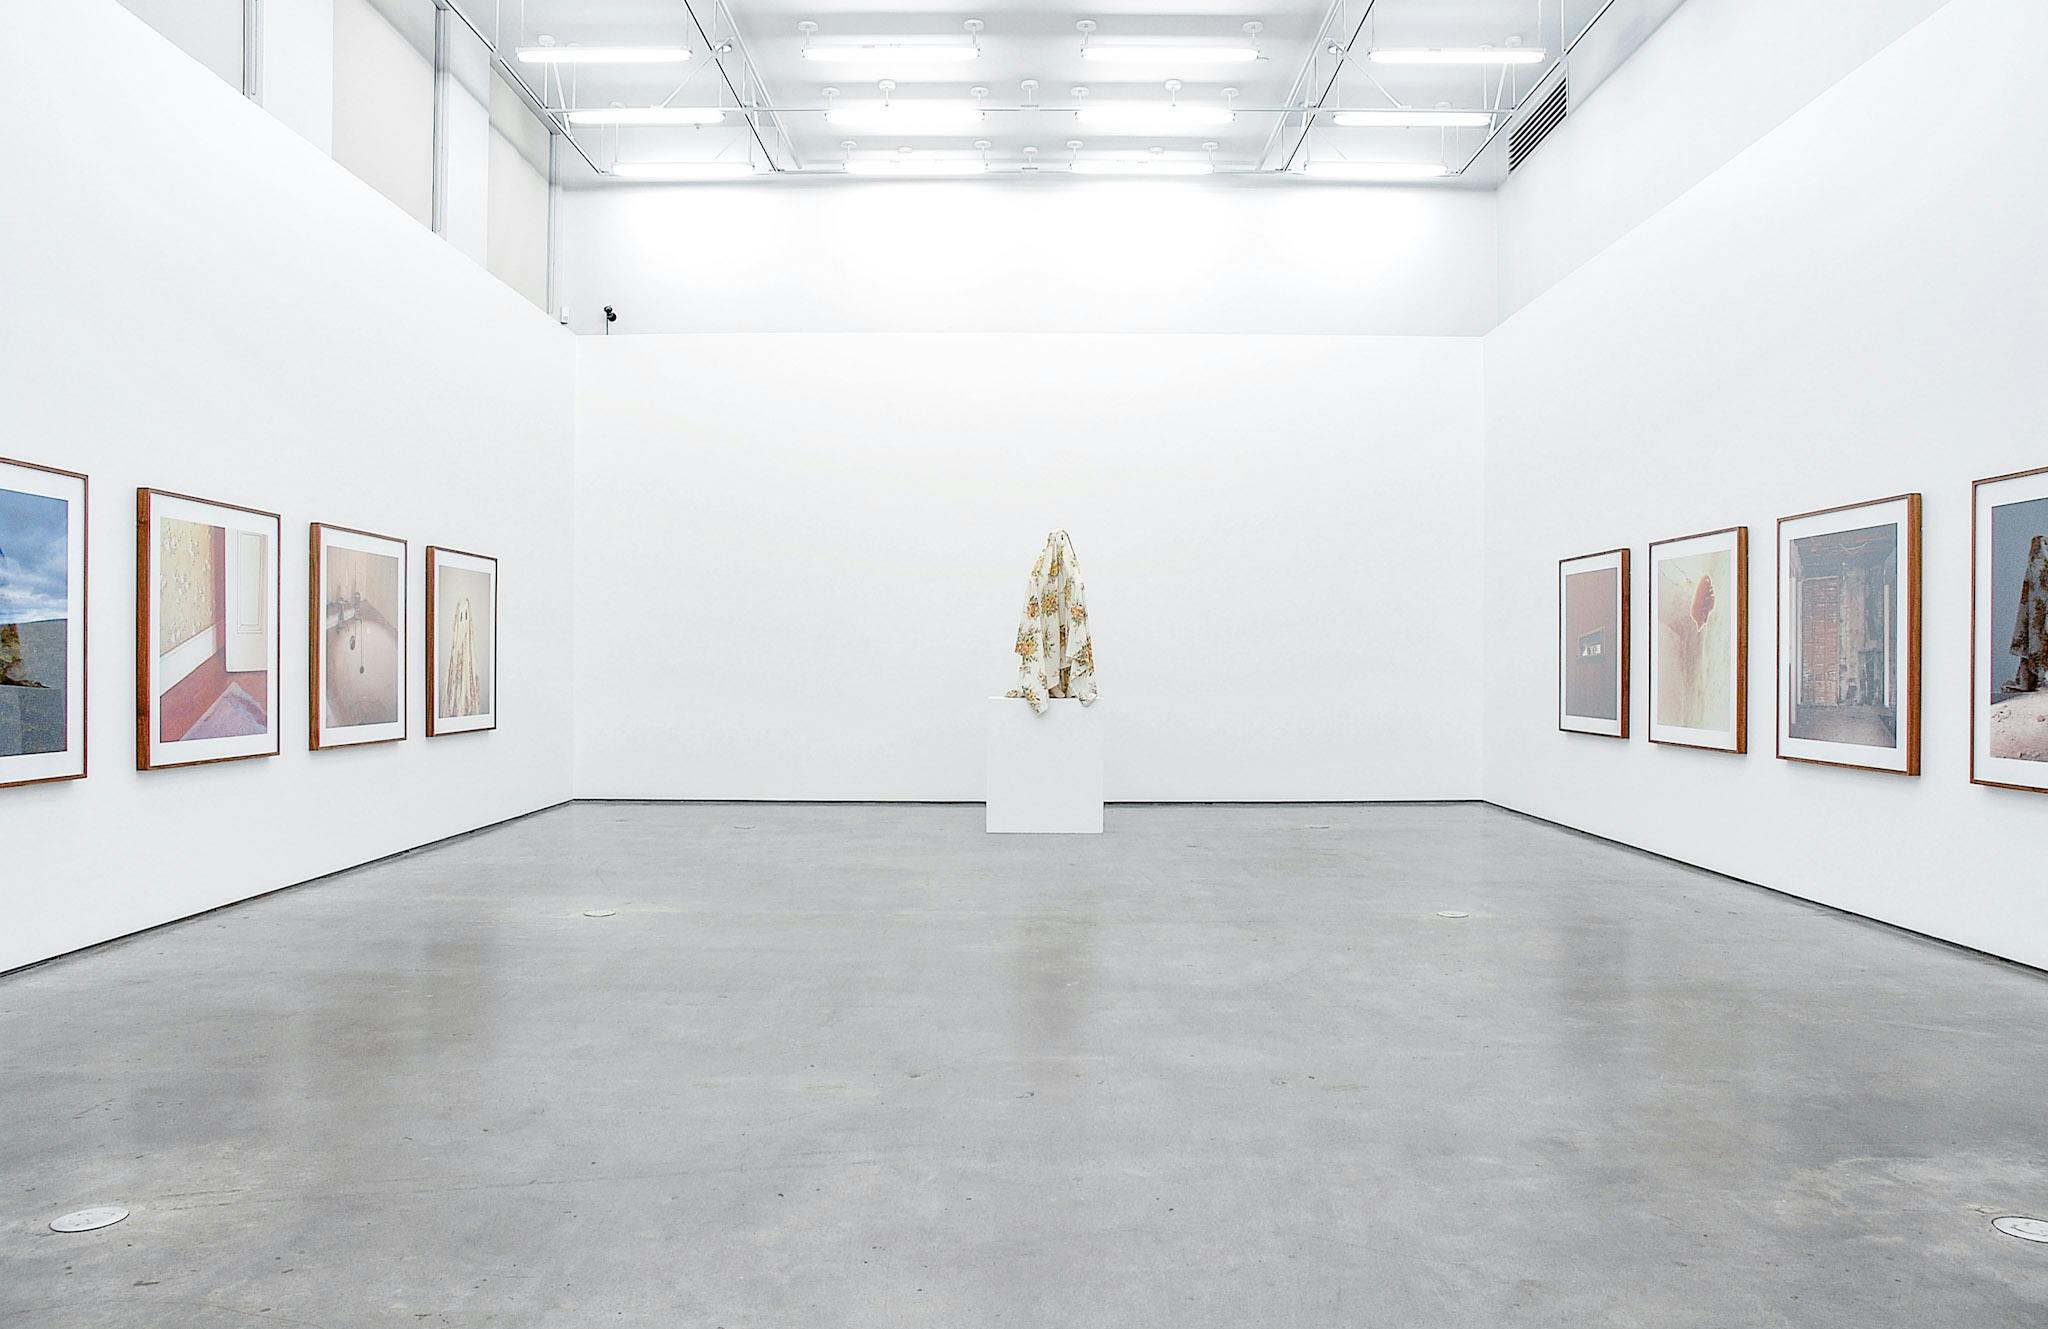 Three visible walls in a gallery. On two walls, there are large colour photos in wood frames. In front of the other wall is a large sculpture of a figure covered in a white sheet, resting on a plinth.